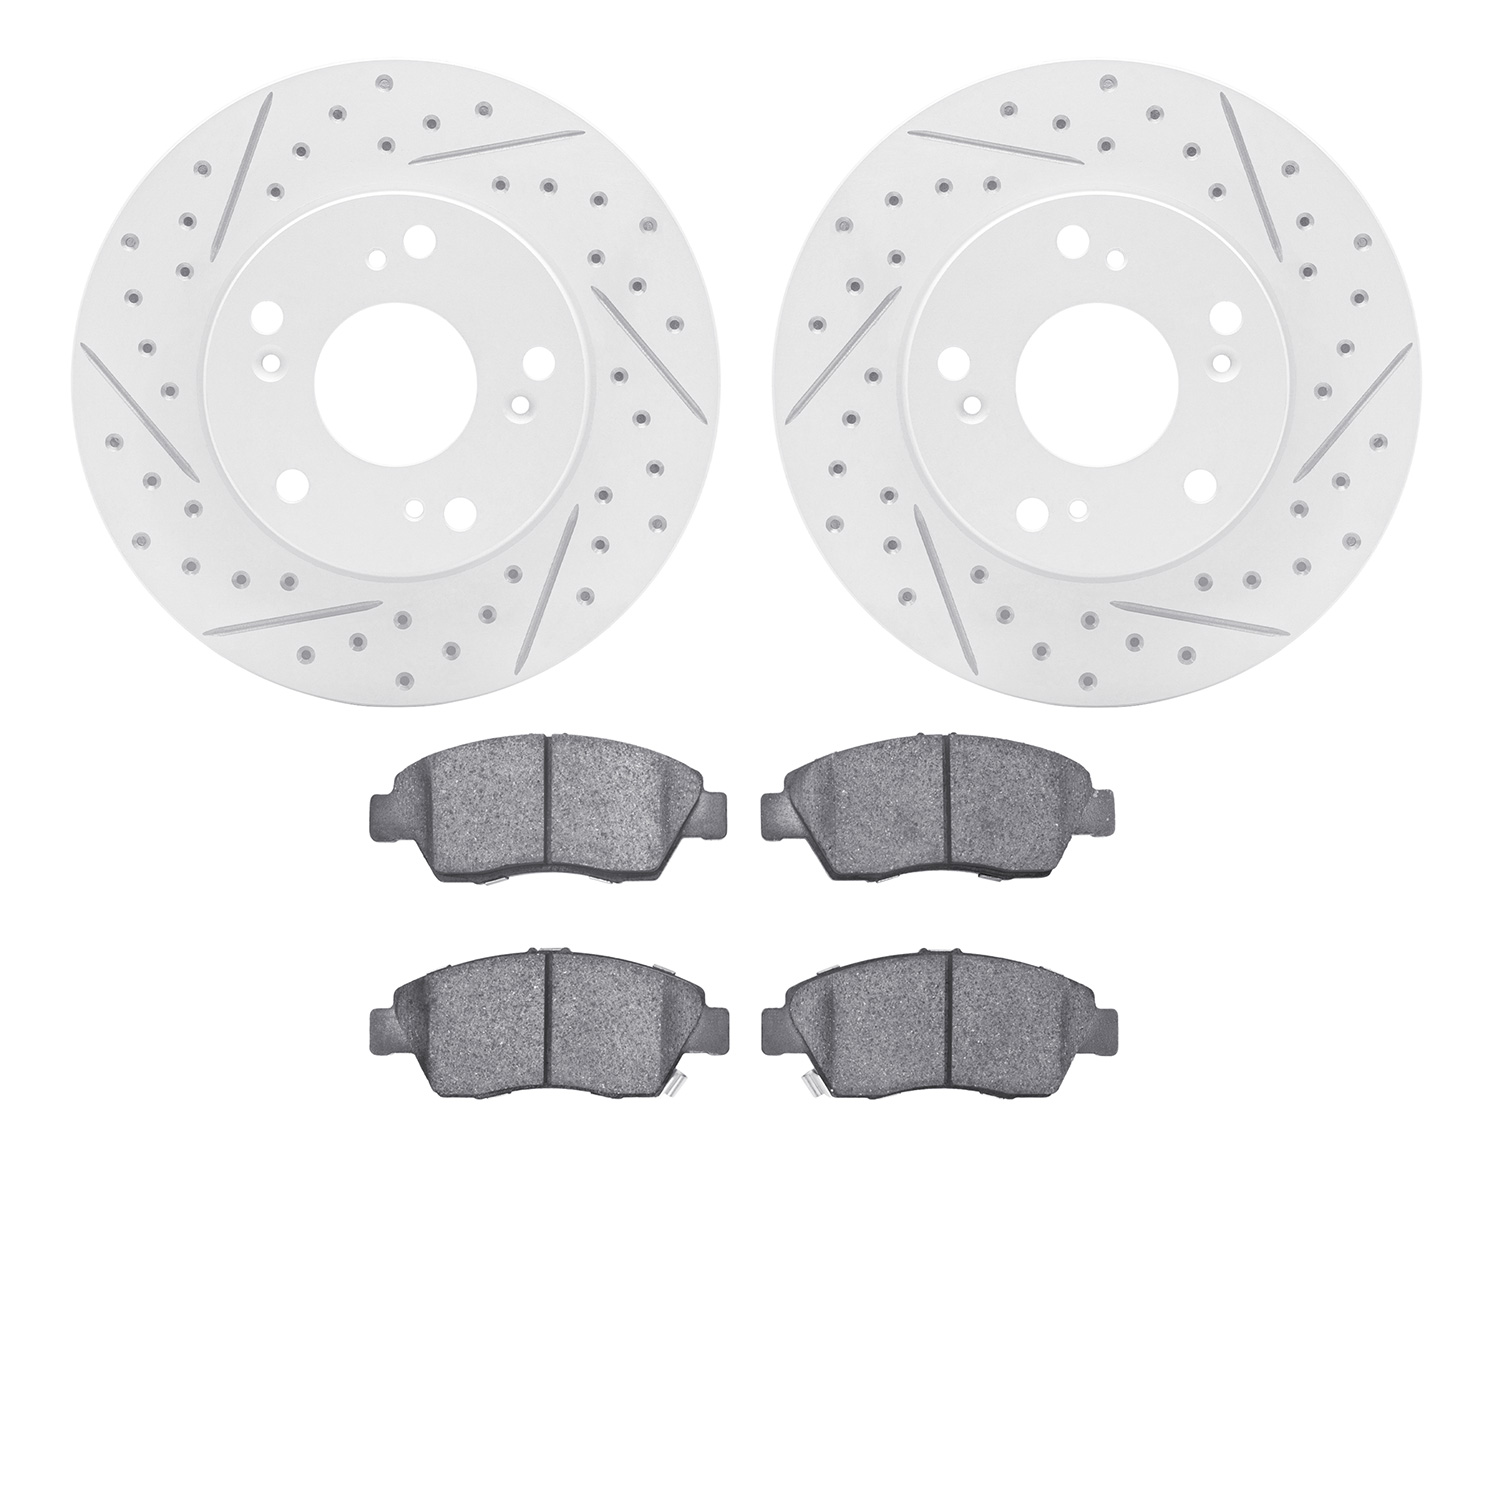 2502-59027 Geoperformance Drilled/Slotted Rotors w/5000 Advanced Brake Pads Kit, 2002-2011 Acura/Honda, Position: Front